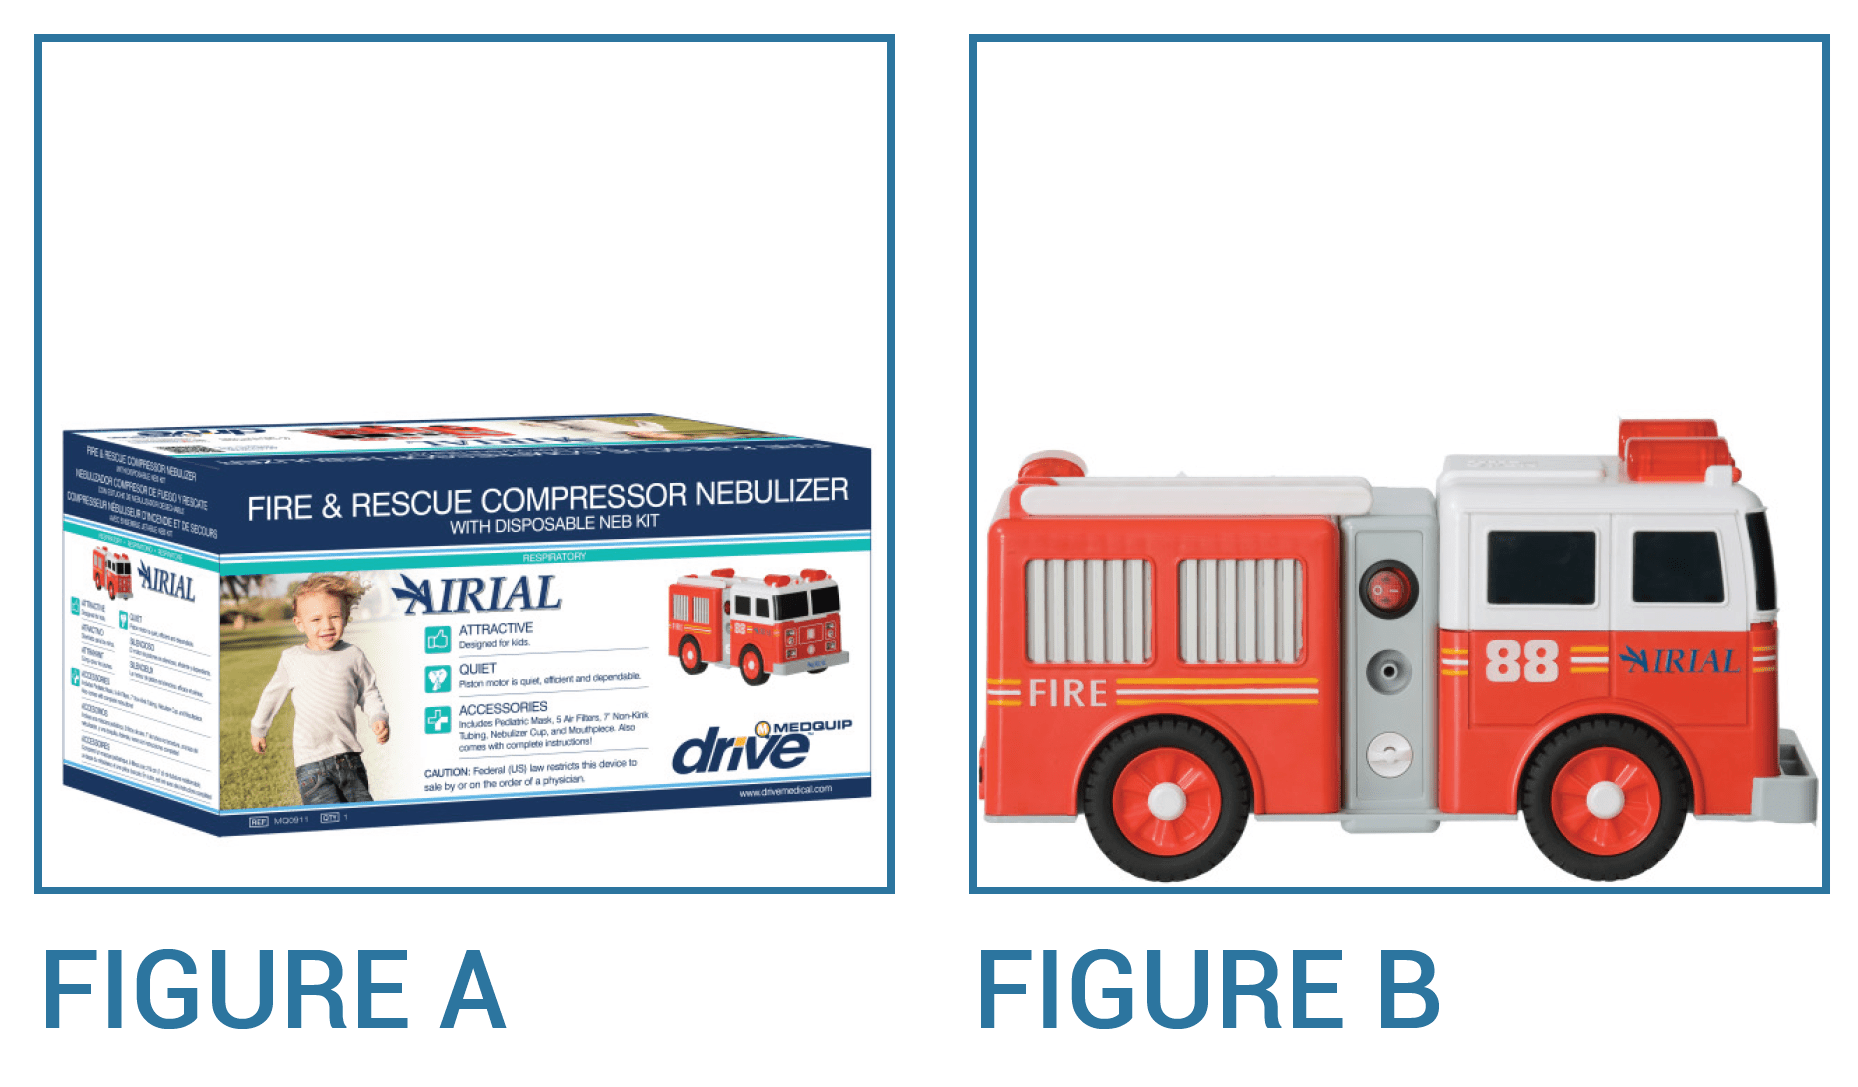 Fire Rescue Nebulizer features: Help Inc. - Everyone is relying on you. You can rely on us.